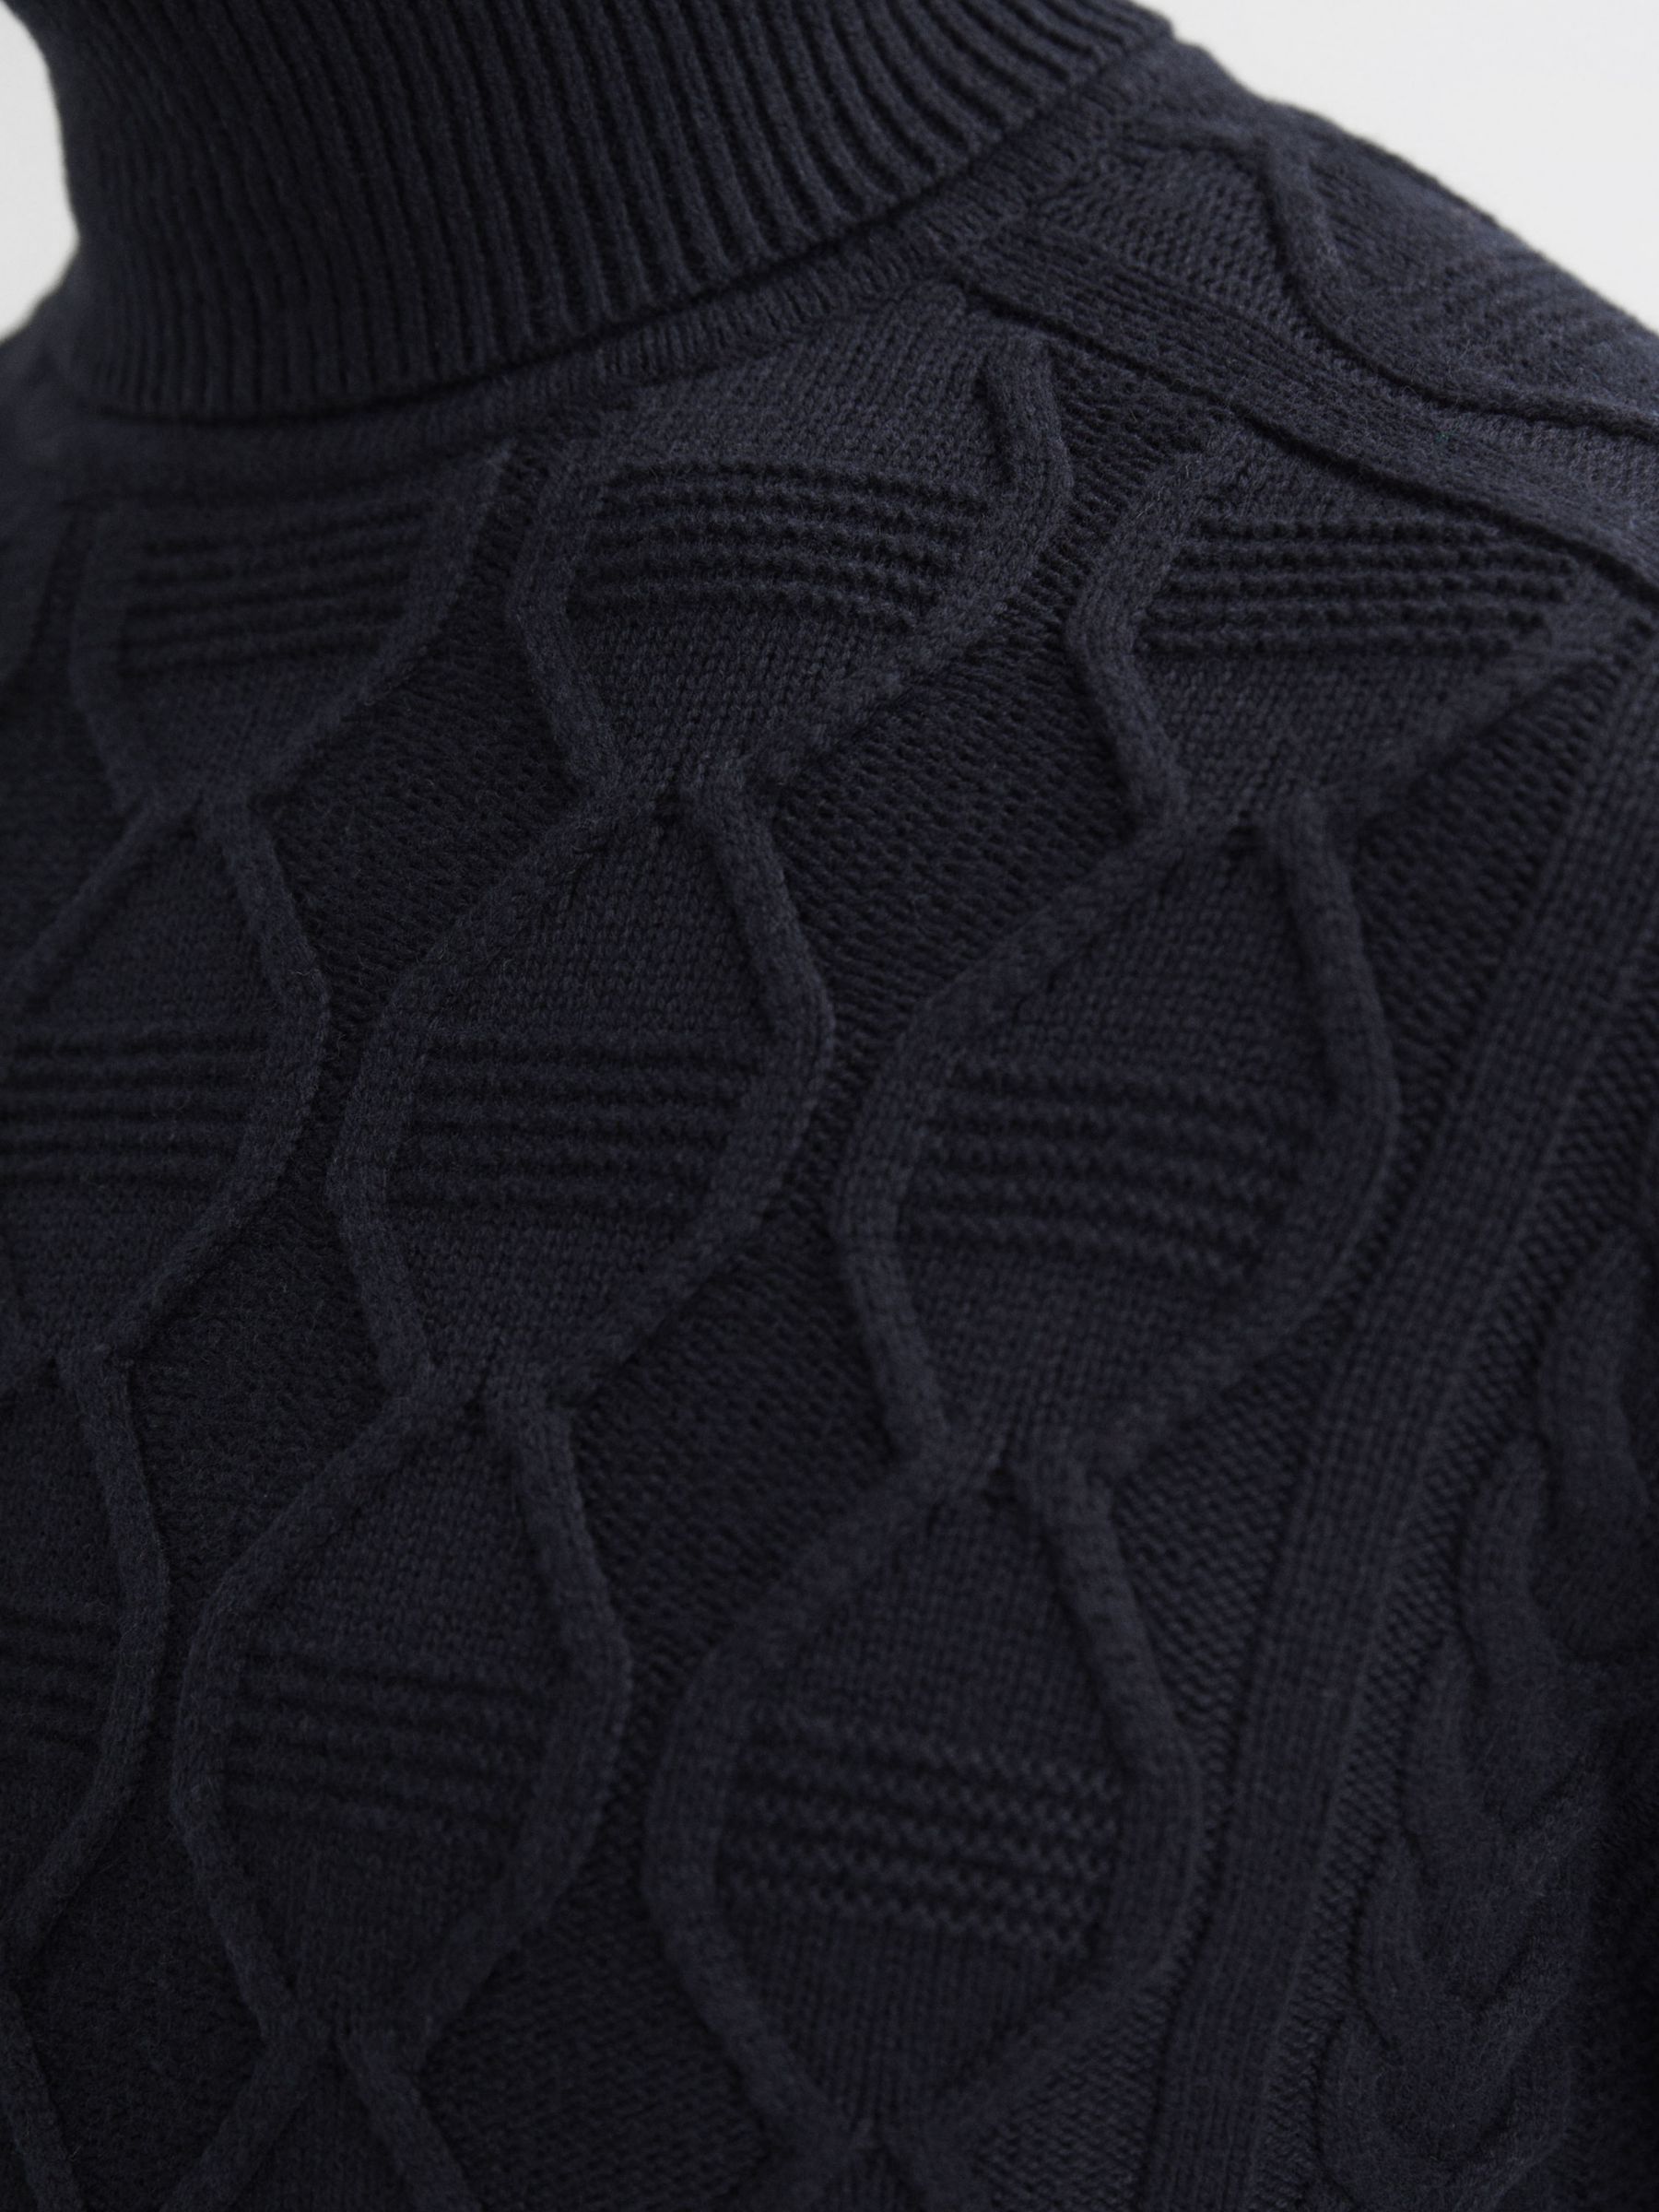 Buy Reiss Alston Long Sleeve Roll Neck Cable Knit Jumper, Navy Online at johnlewis.com